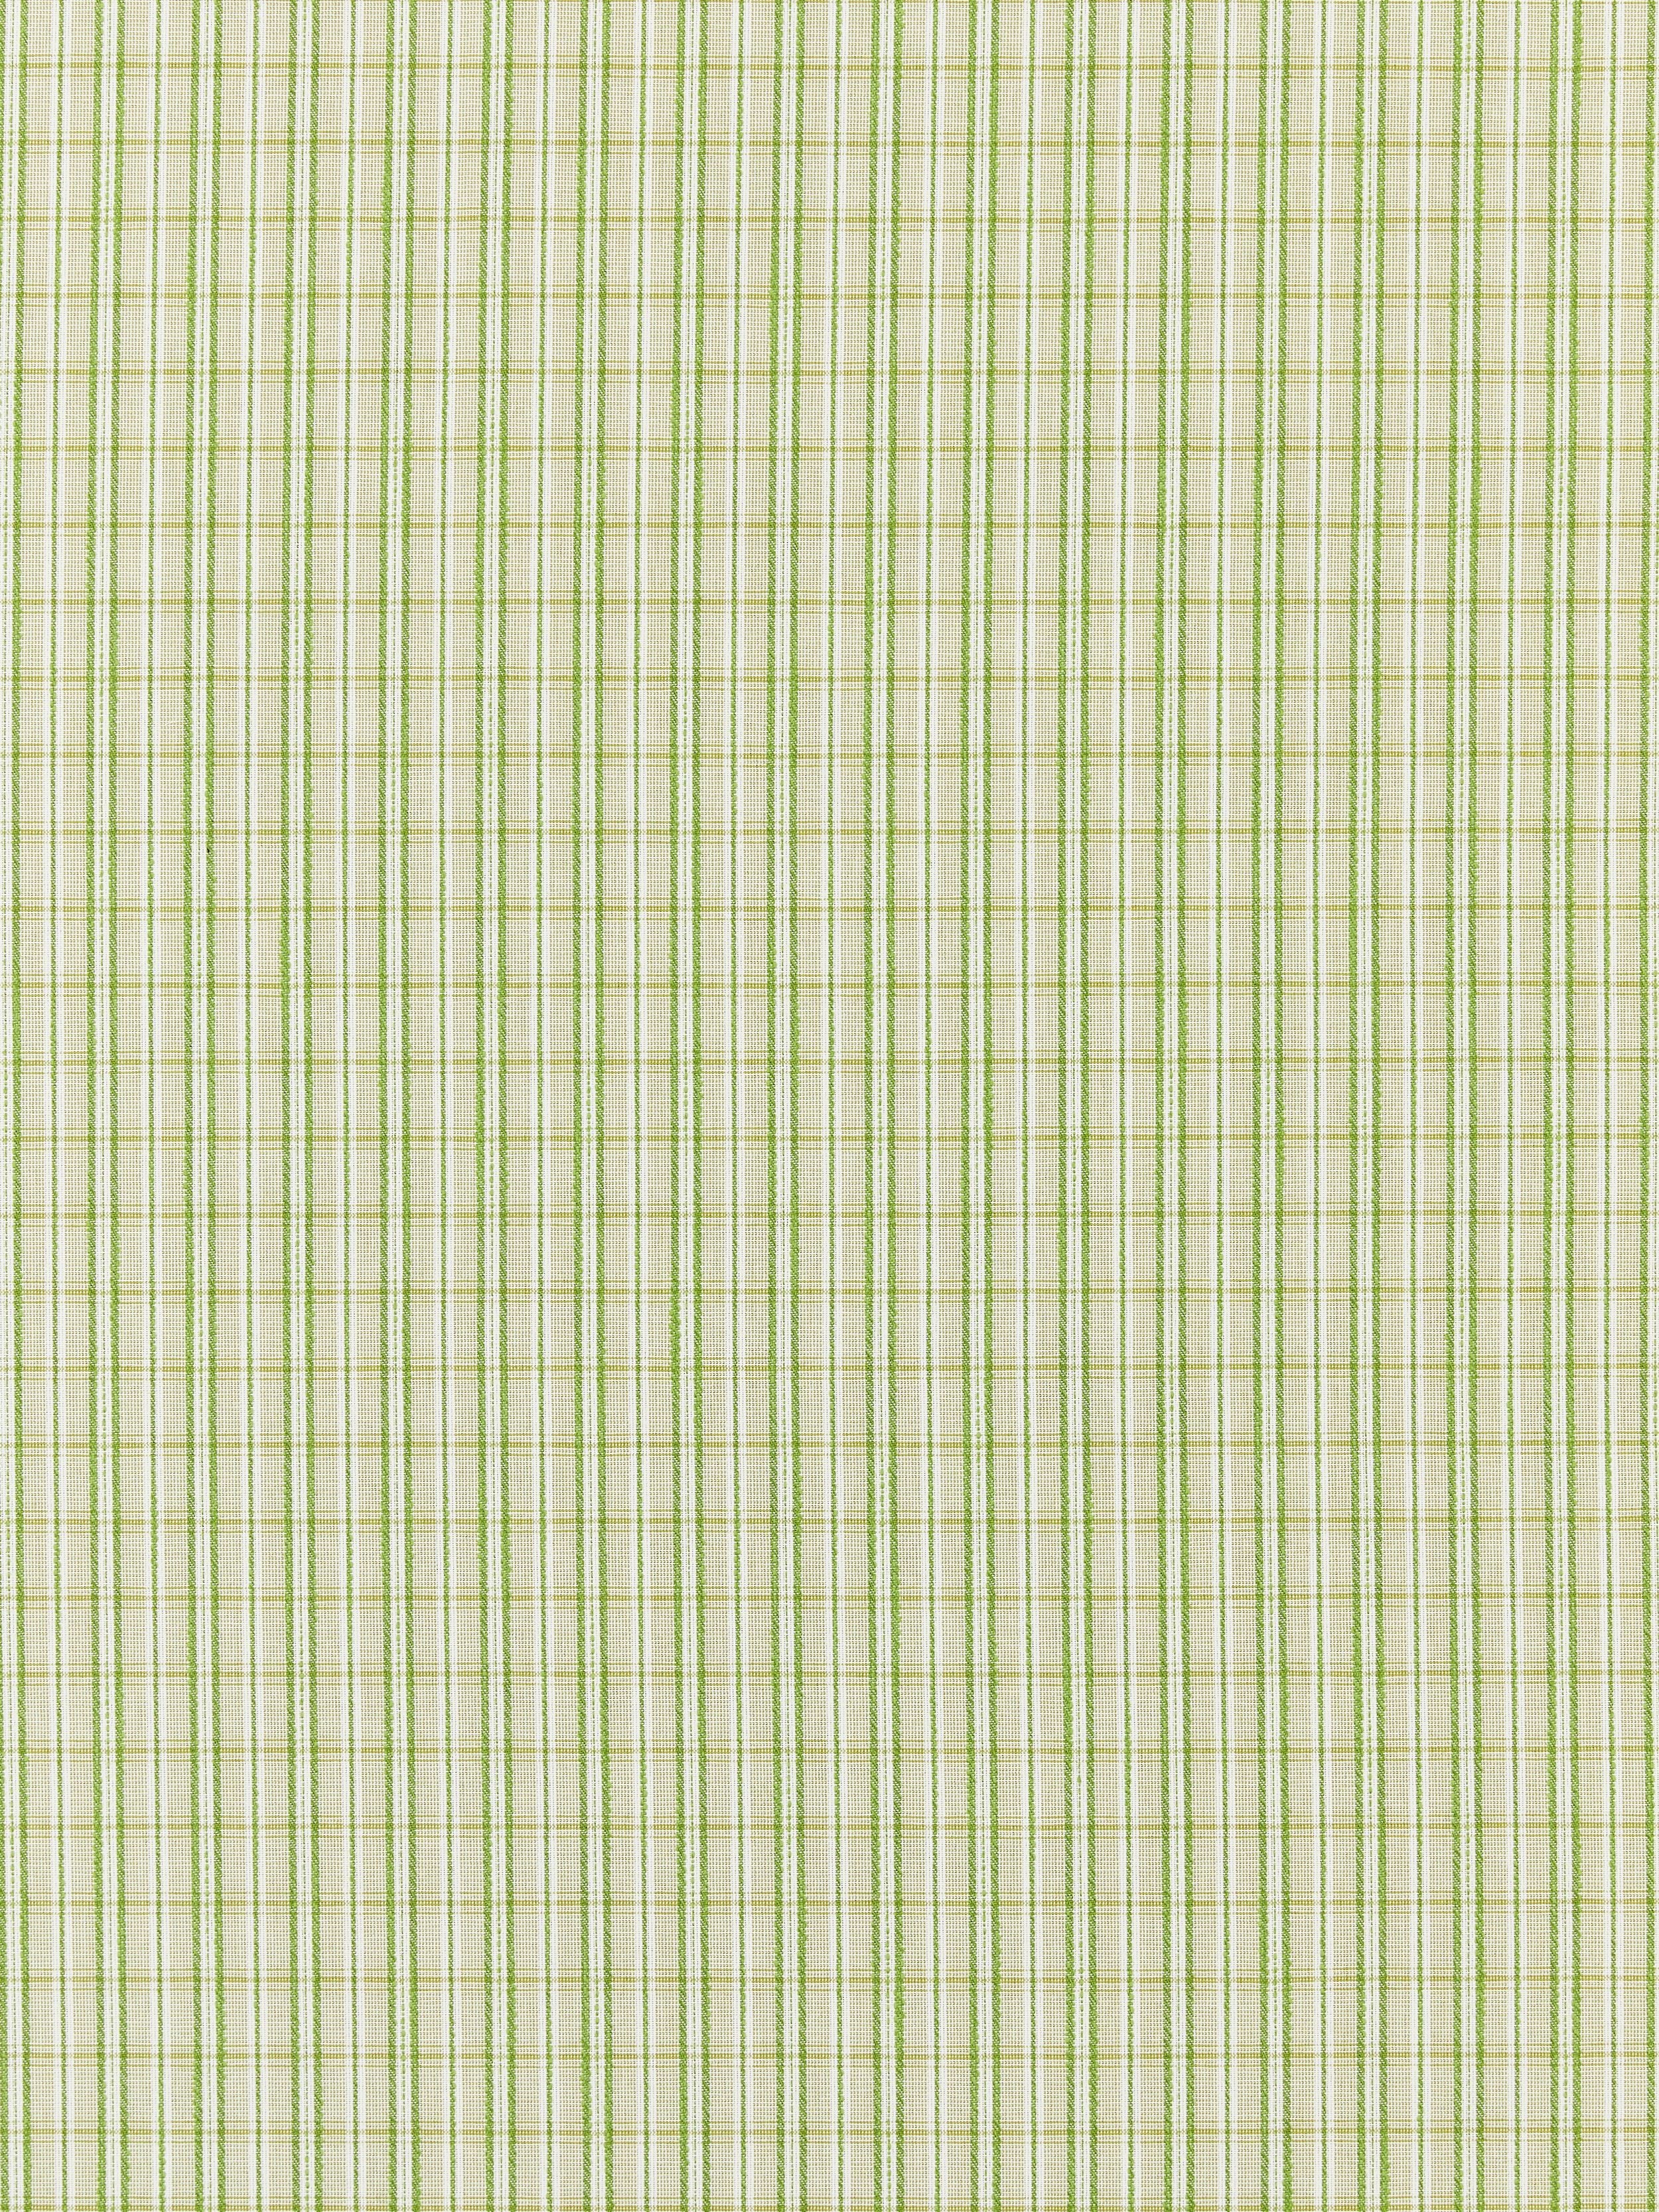 Check Please Outdoor fabric in fern color - pattern number SC 000327318 - by Scalamandre in the Scalamandre Fabrics Book 1 collection